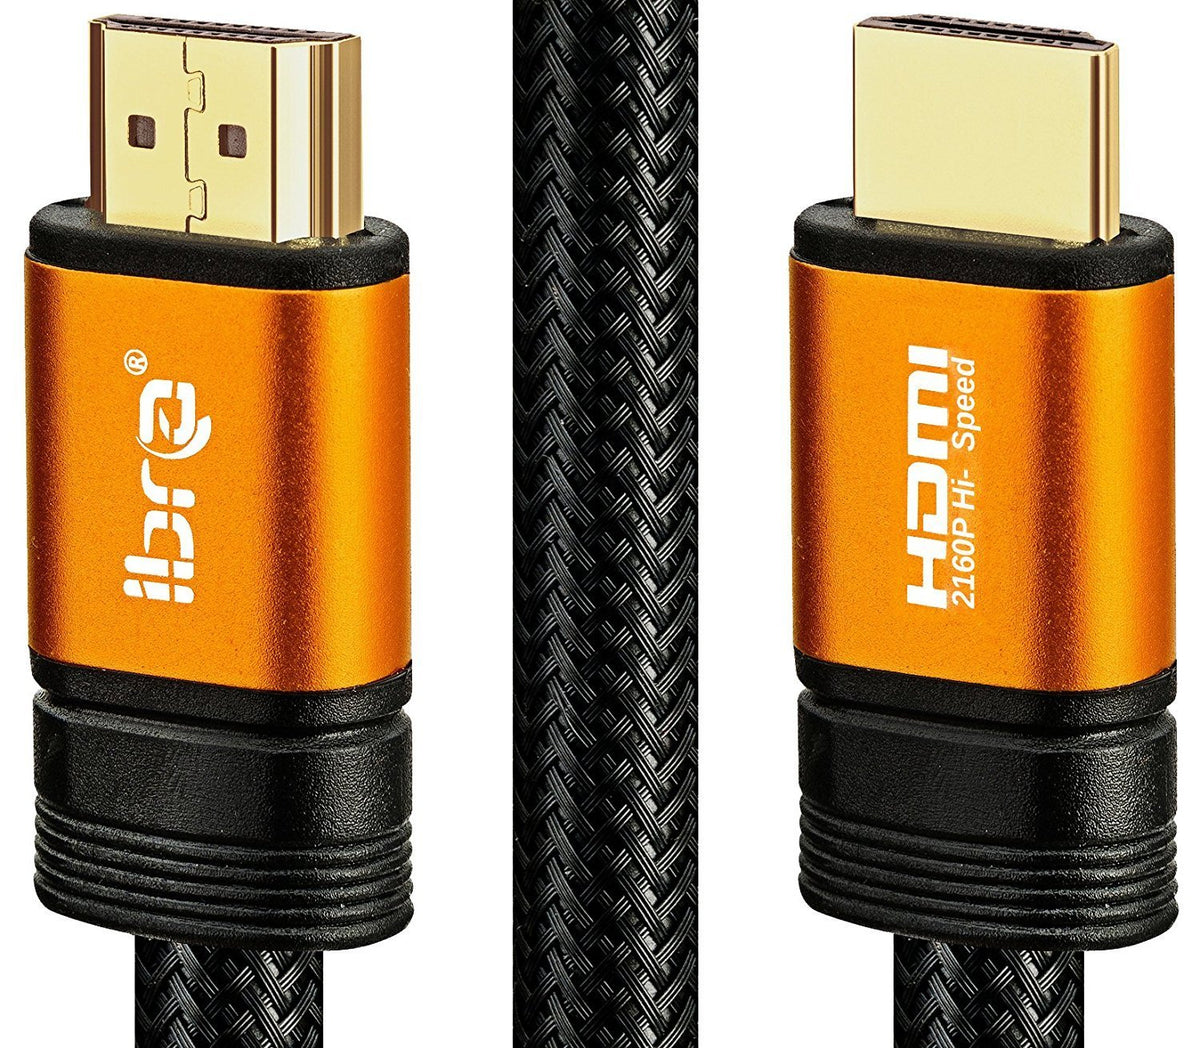 IBRA Orange HDMI Cable 5M - UHD HDMI 2.0 (4K@60Hz) Ready -18Gbps-28AWG Braided Cord -Gold Plated Connectors -Ethernet,Audio Return-Video 4K 2160p,HD 1080p,3D -Xbox PlayStation PS3 PS4 PC Apple TV